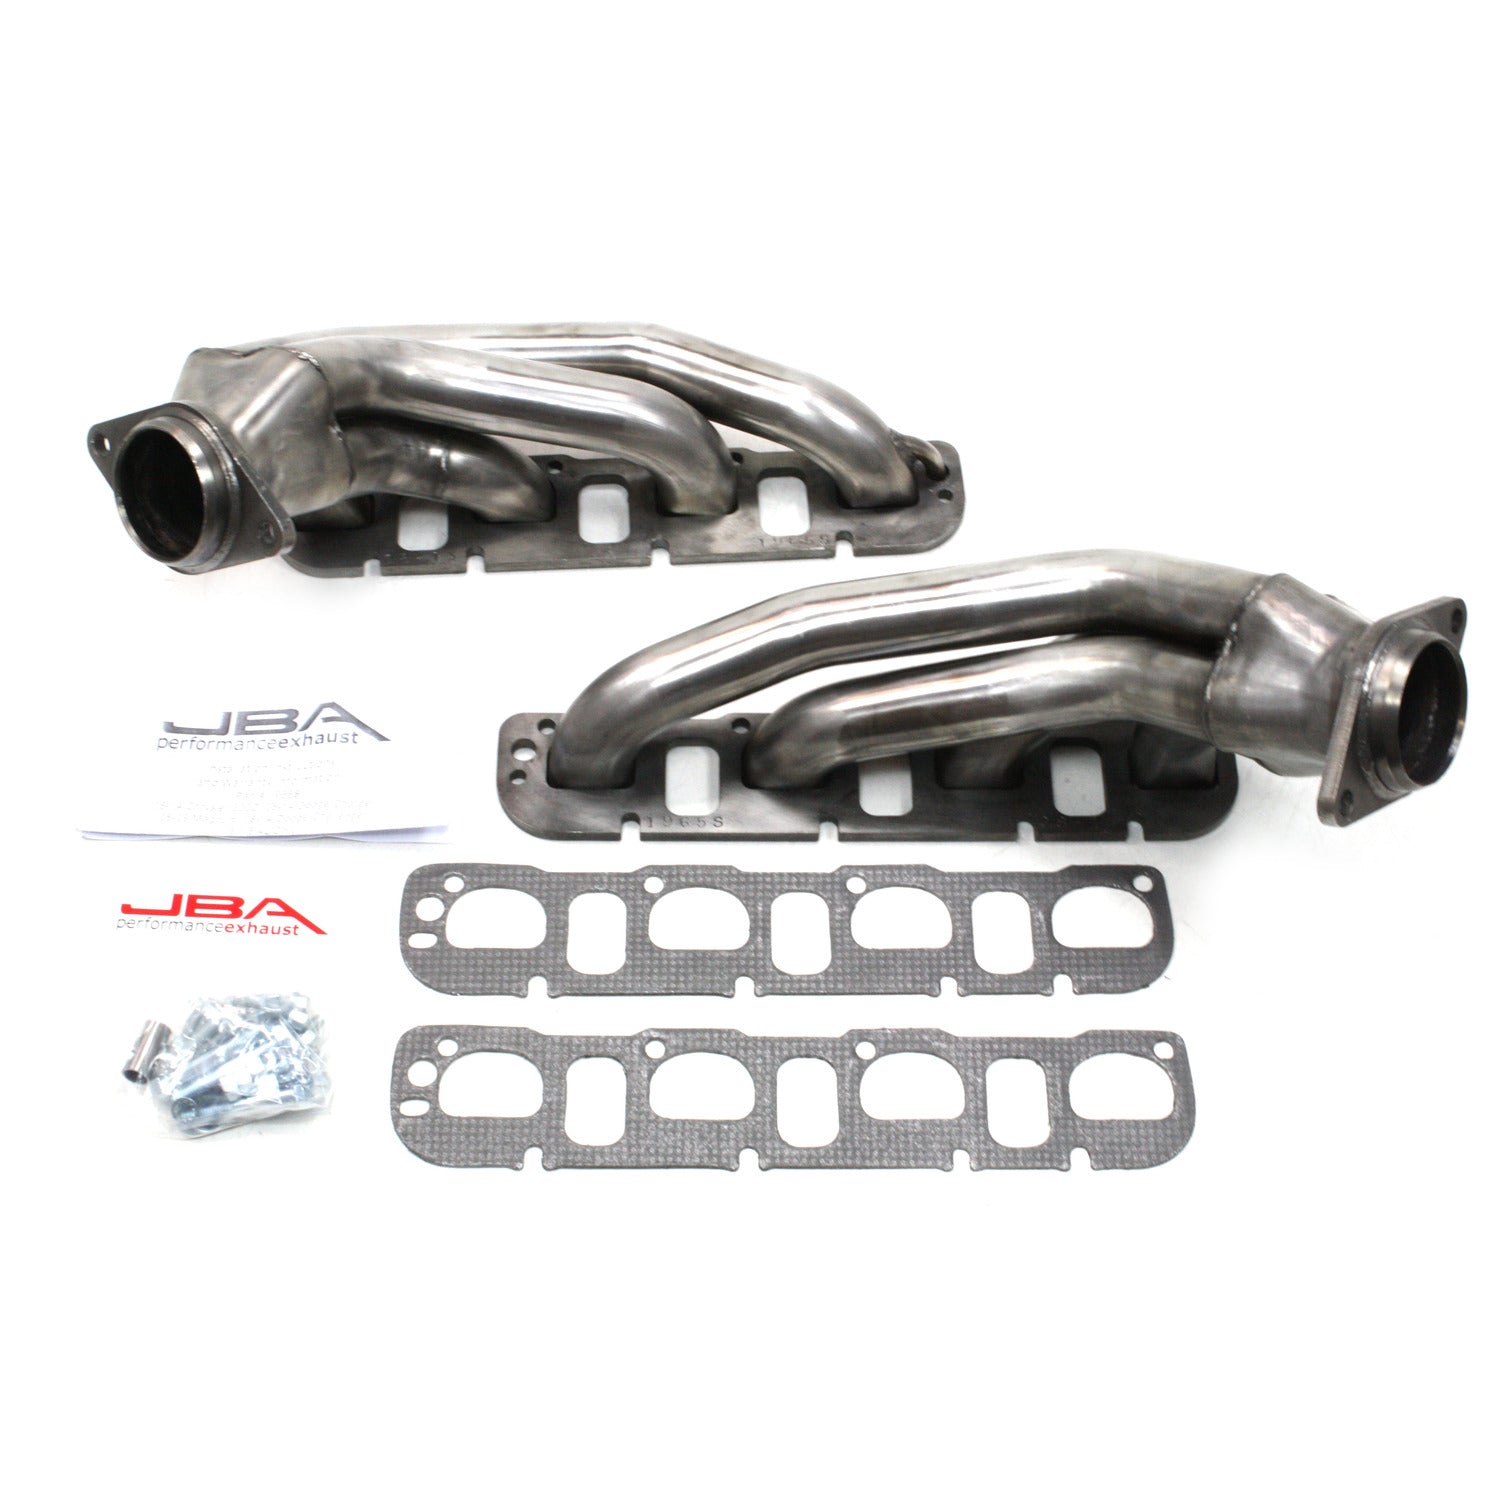 JBA Performance Exhaust 1965S Header Shorty Stainless Steel 05-14 Challenger/Charger/Magnum/300C